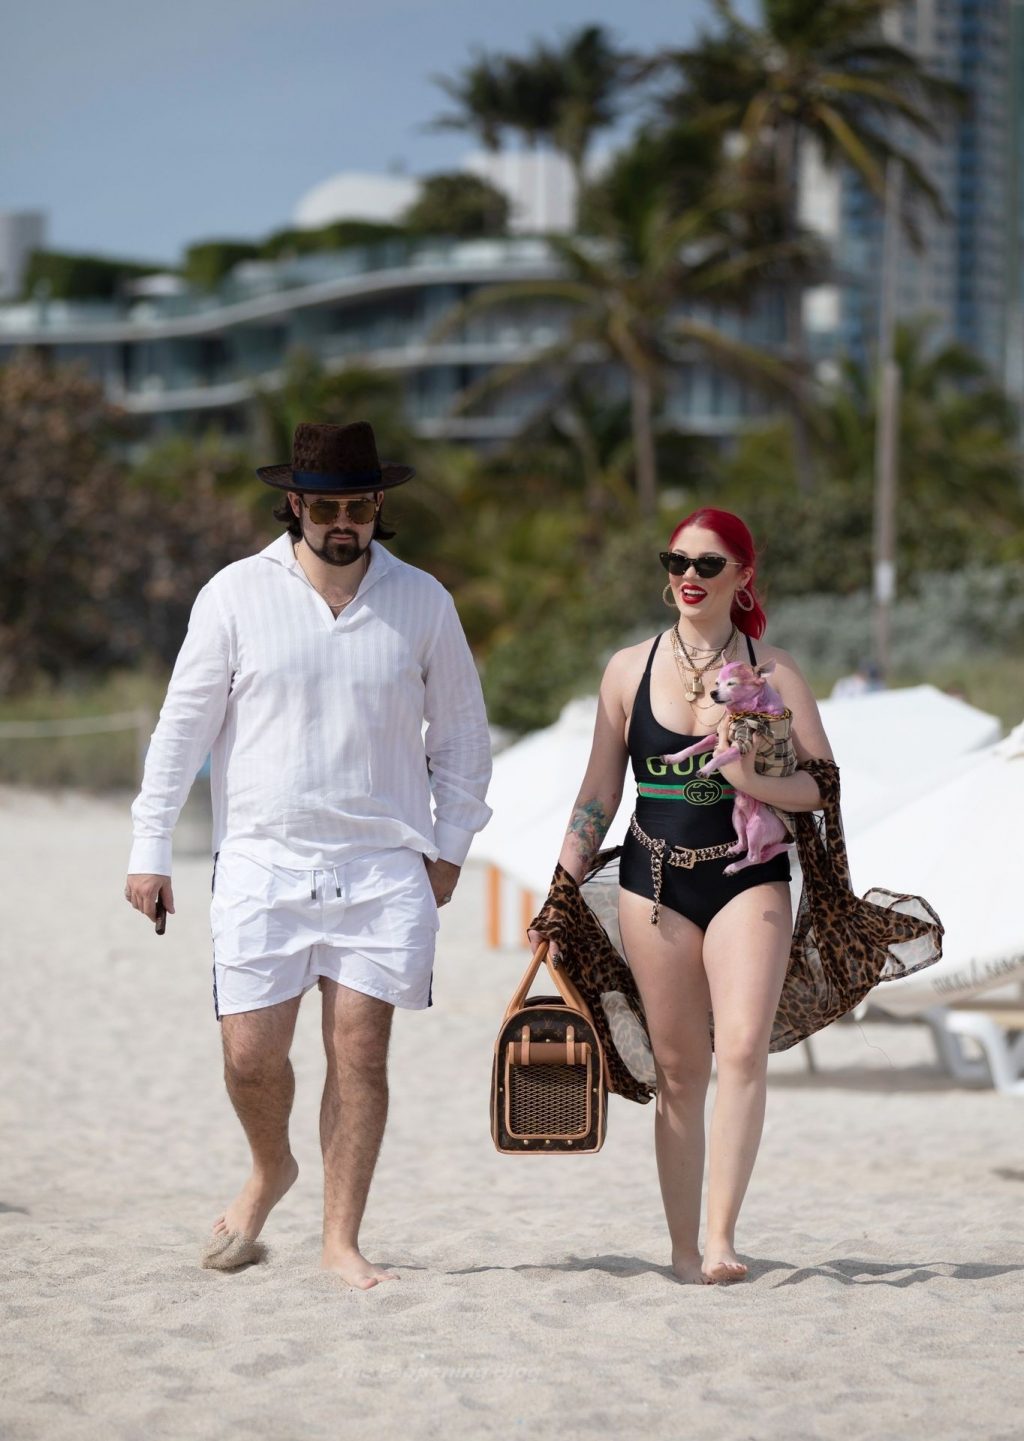 Denny Strickland and His Girlfriend Hunter Enjoy a Romantic Walk on the Beach in Miami (34 Photos)